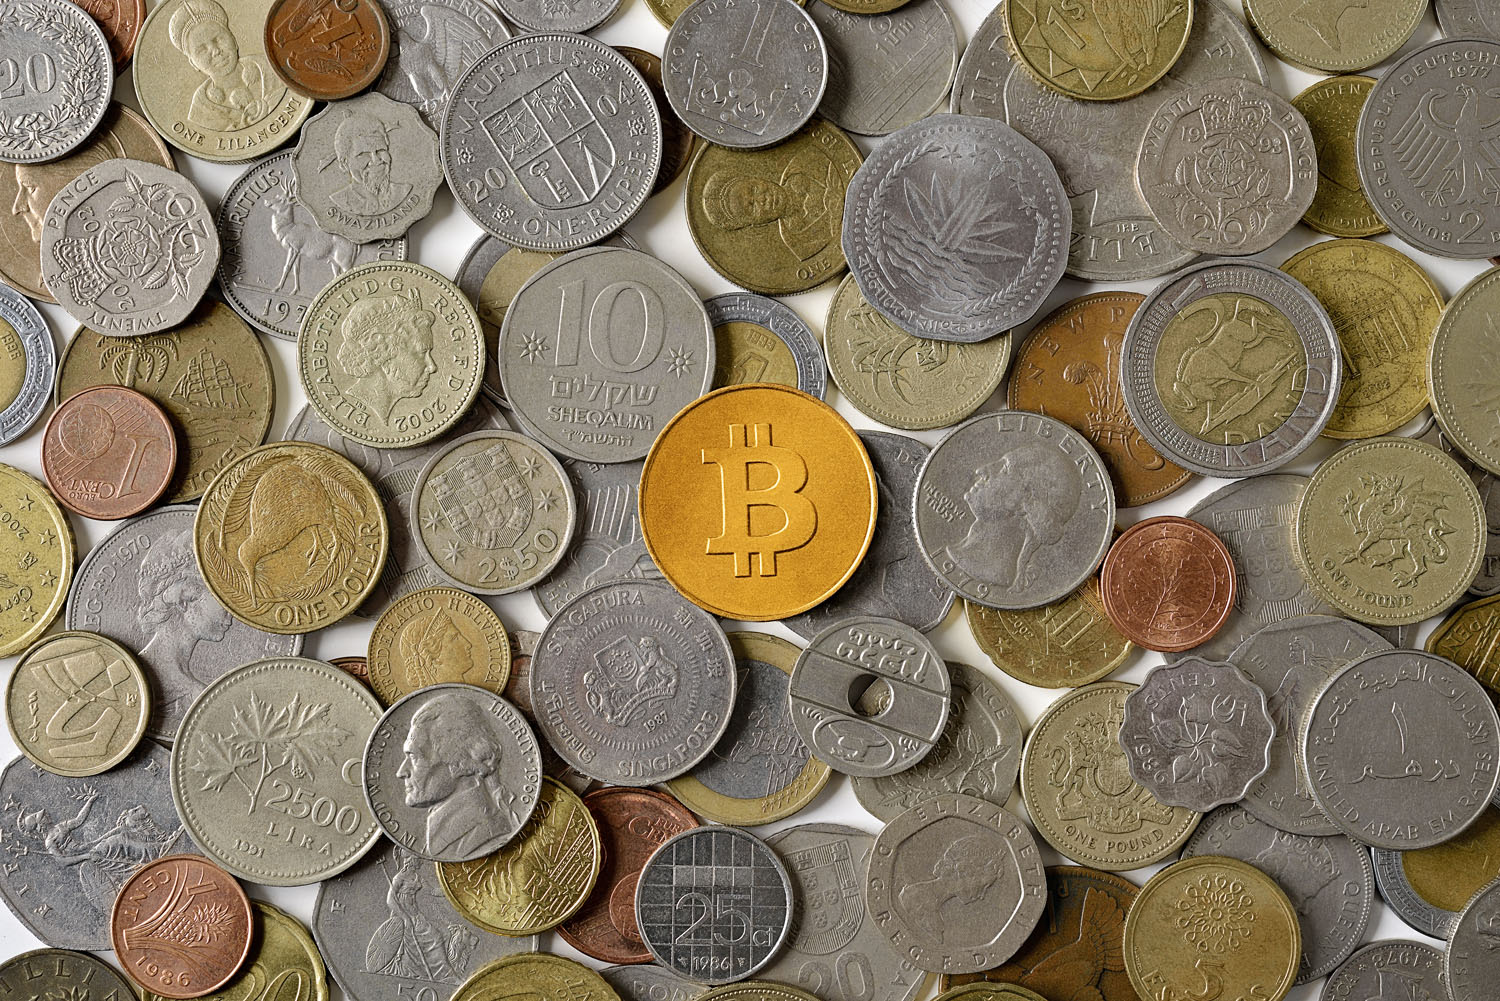 Bitcoin, center, is surrounded by various world coins. (David Malan&mdash;Getty Images)